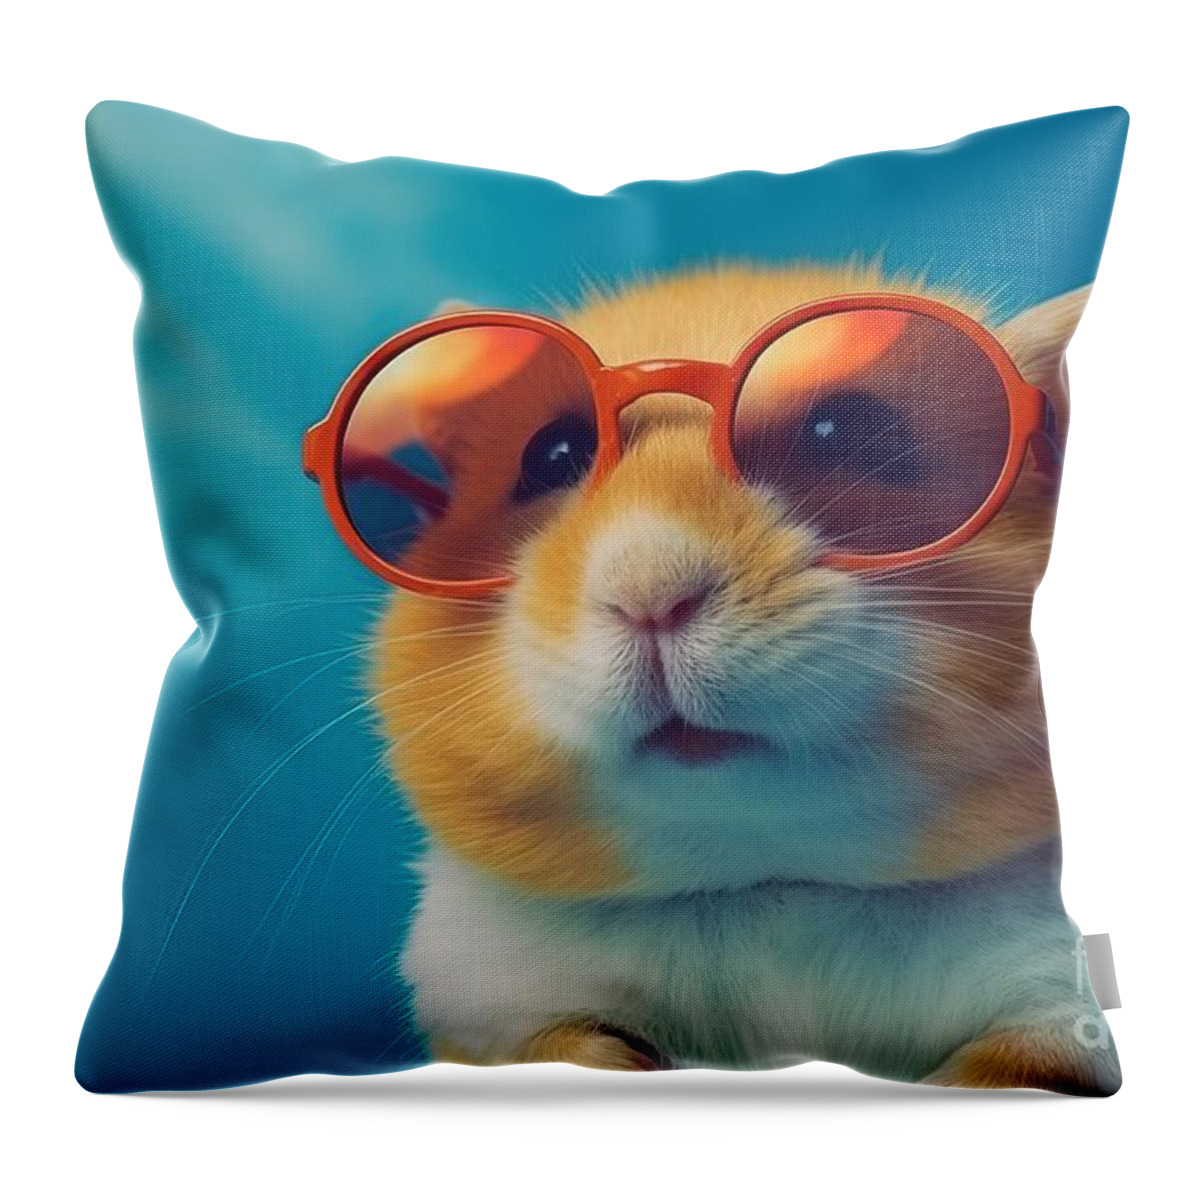 Hamster Throw Pillow featuring the painting Backdrop Blue Superimposed Sunglasses Donning Hamster Cool Adorable Pet Rodent Cute Tiny Small Furry Fun Animal Paw Whisker Stylish Groovy Funky Unique Fashion Trendy Hipster Shades Eyewear Bright by N Akkash